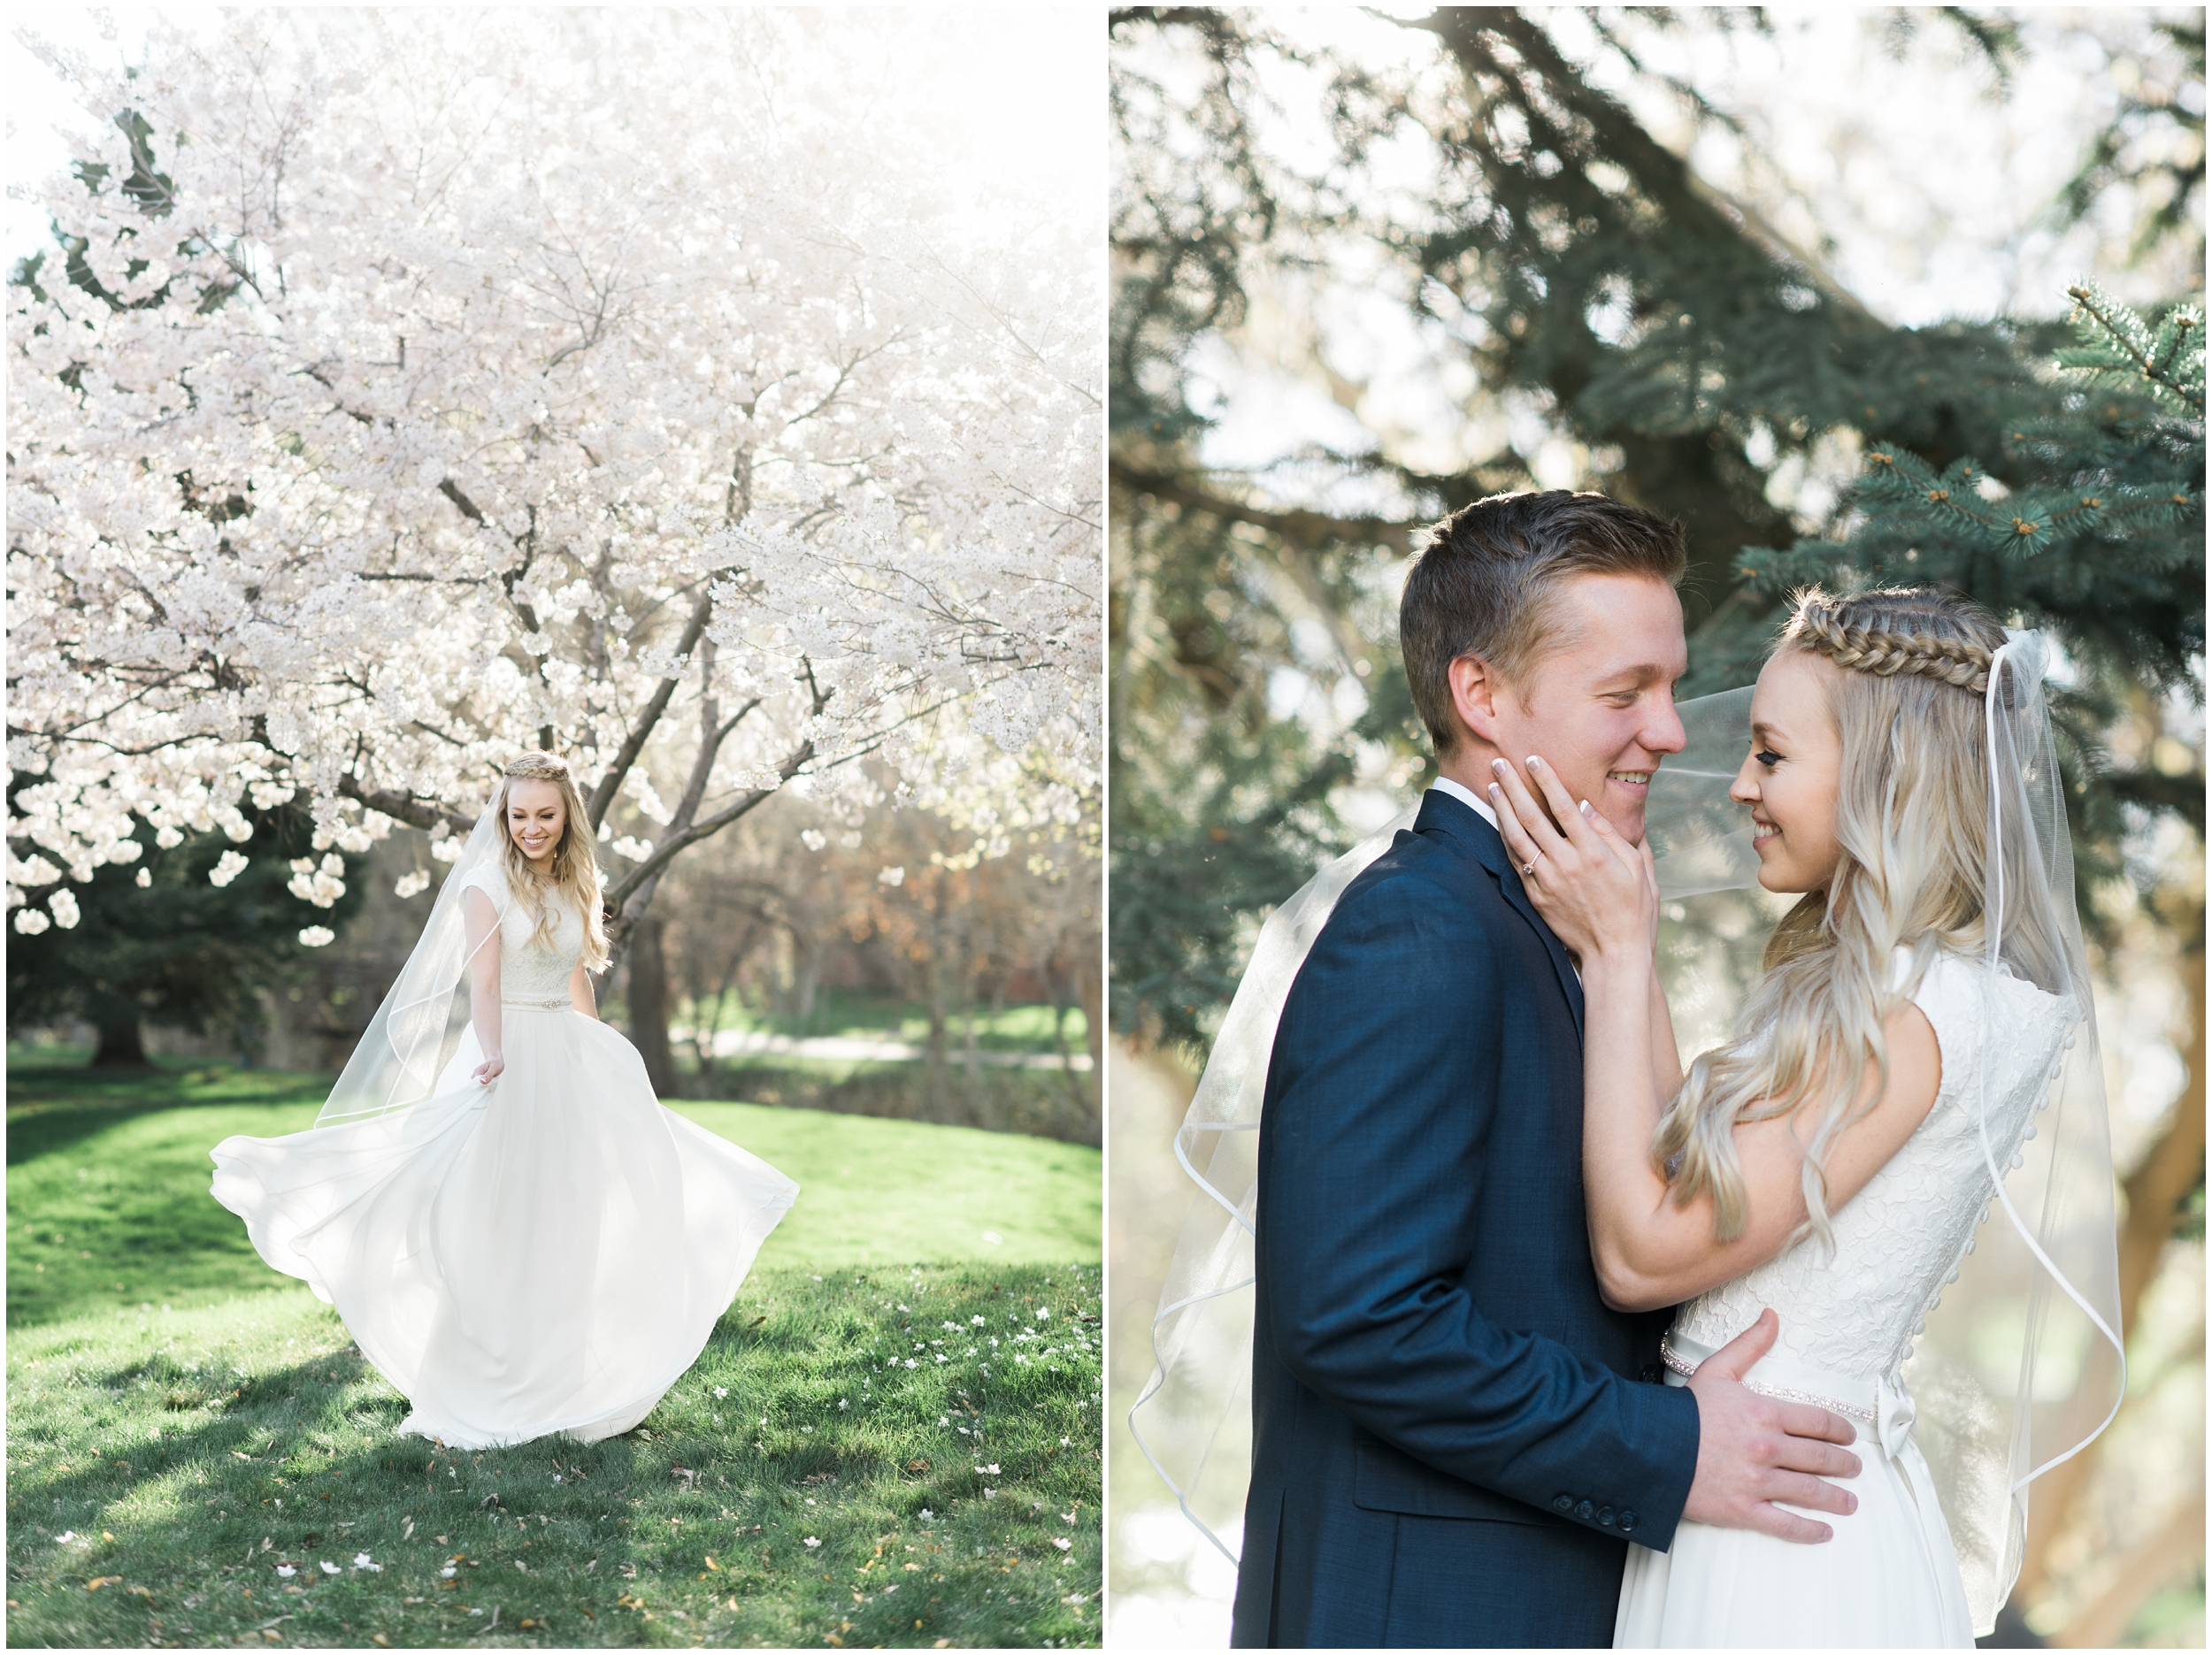 Kristina Curtis, blush flowers, spring blossoms photos, spring engagements, outdoor engagements, long veil, blush and navy wedding, spring outdoor engagements, photographers in Utah, Utah family photographer, family photos Utah, Kristina Curtis photography, Kristina Curtis Photographer, www.kristinacurtisphotography.com